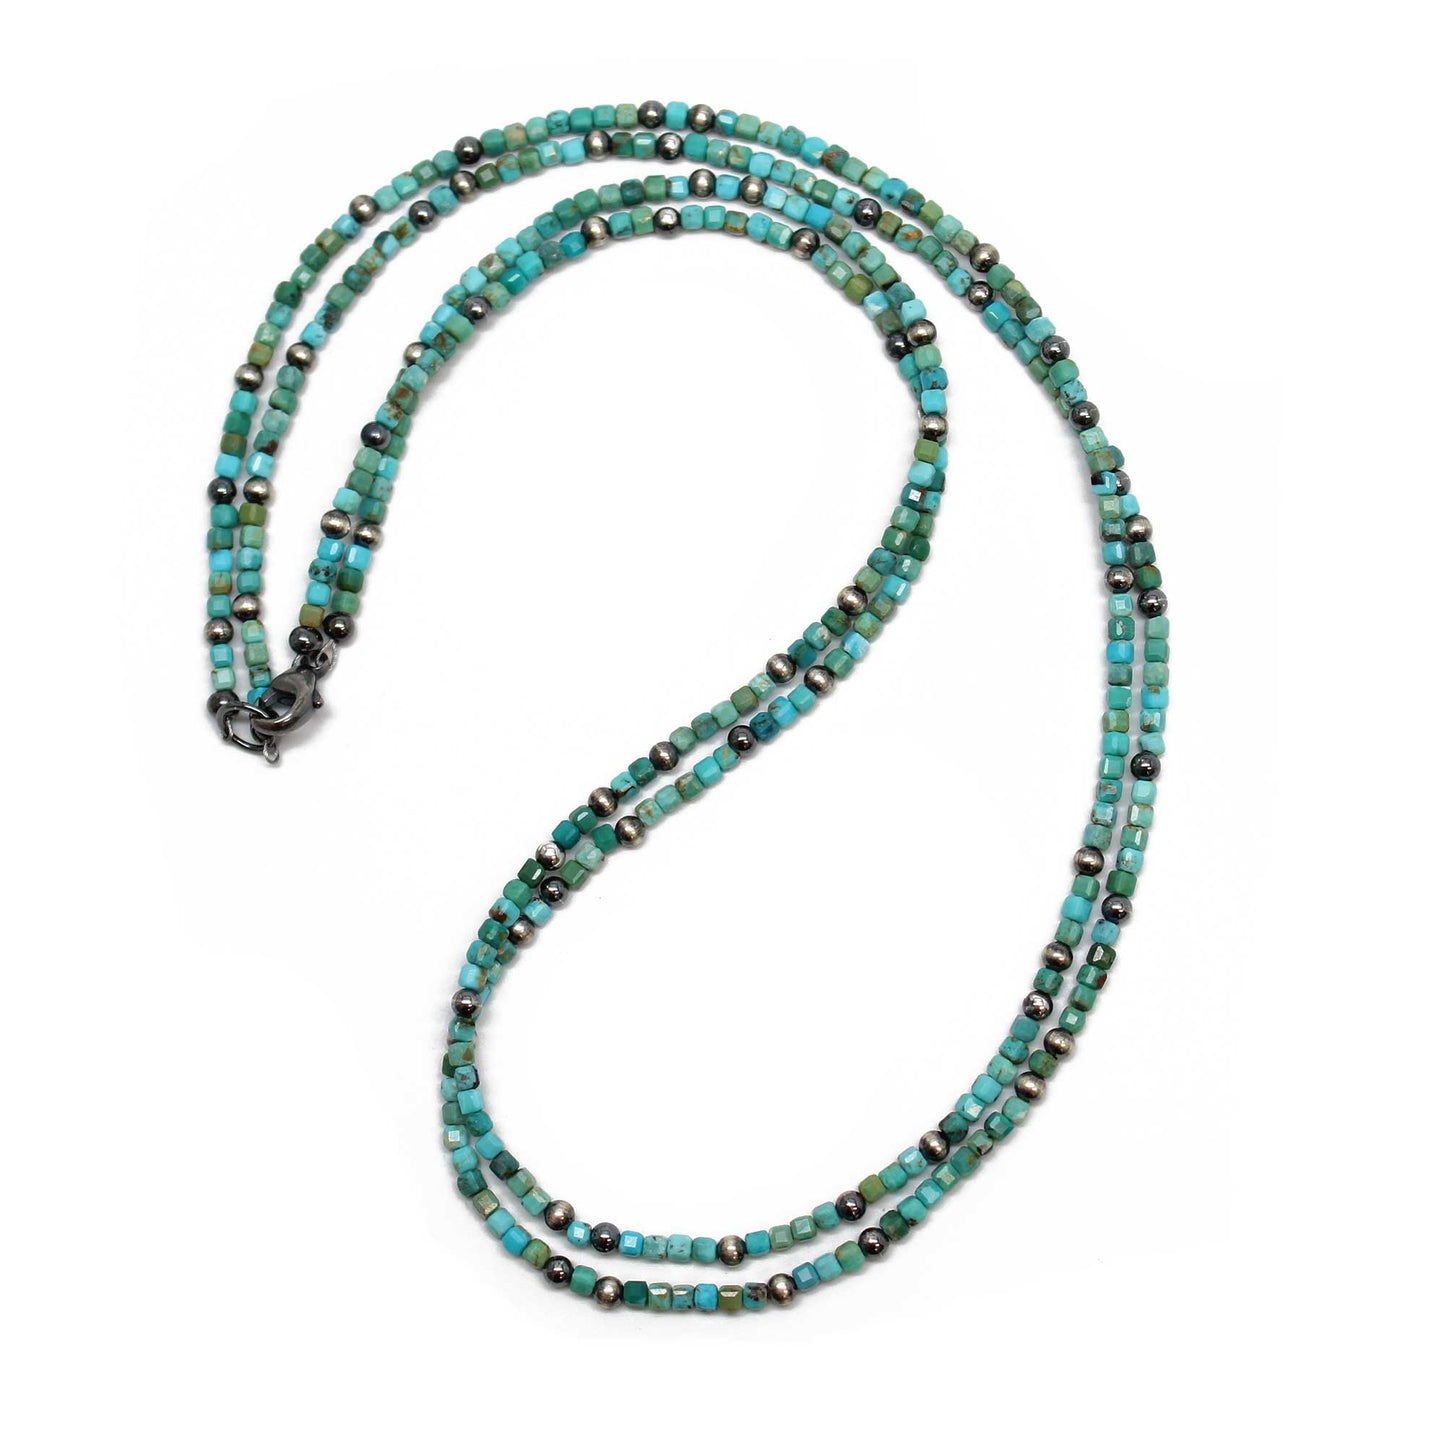 Dainty Double Strand Hubei Turquoise and Antiqued Sterling Silver Bead Necklace